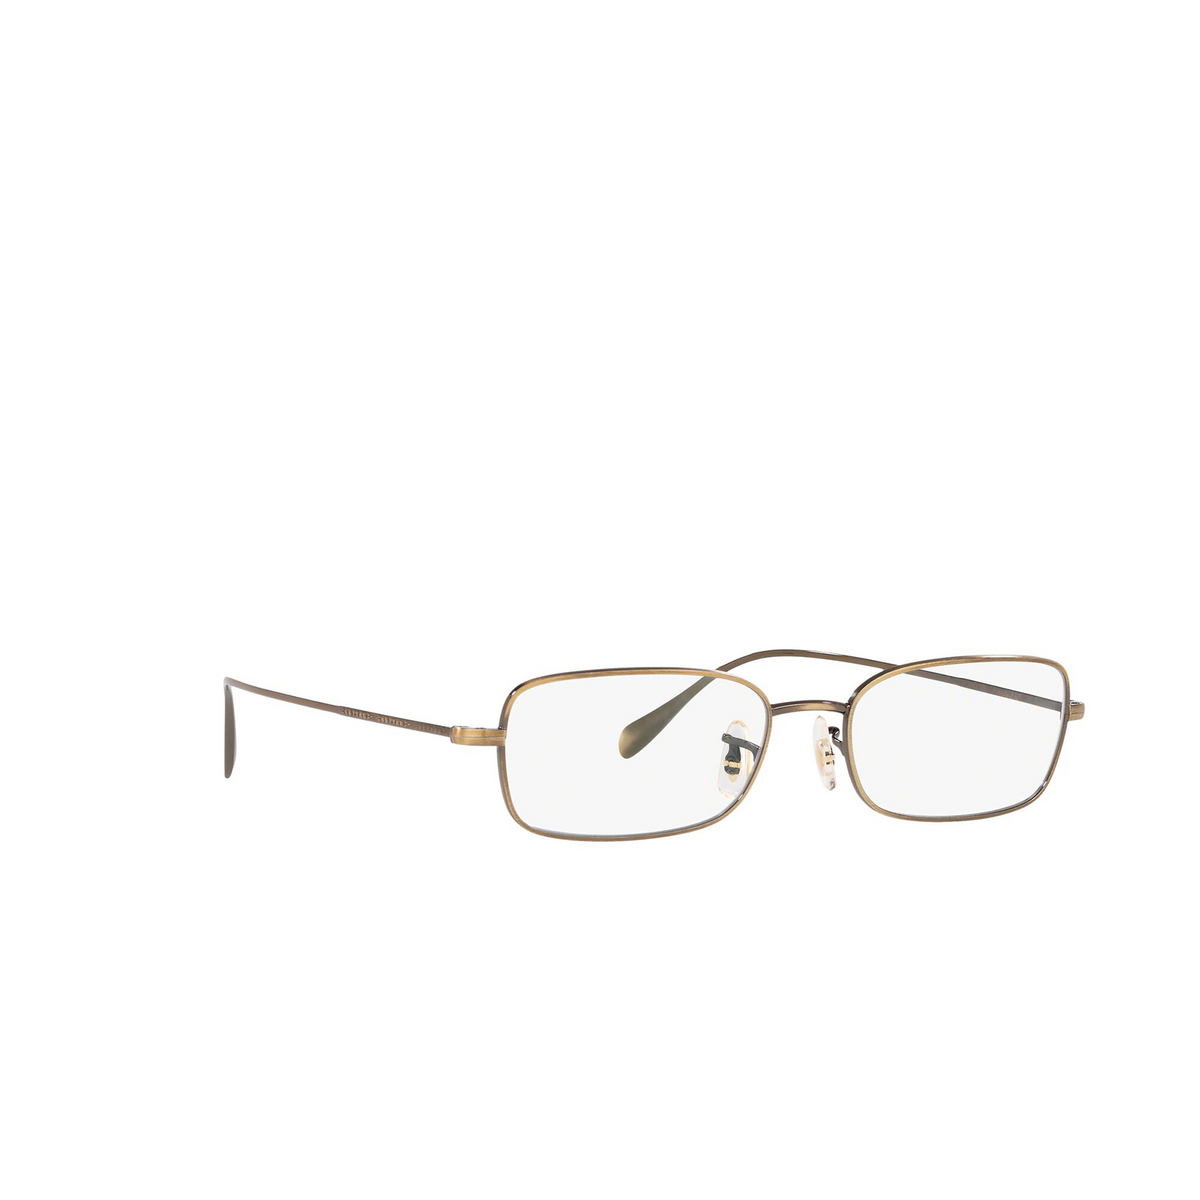 Oliver Peoples® Rectangle Eyeglasses: Aronson OV1253 color Antique Gold 5284 - three-quarters view.